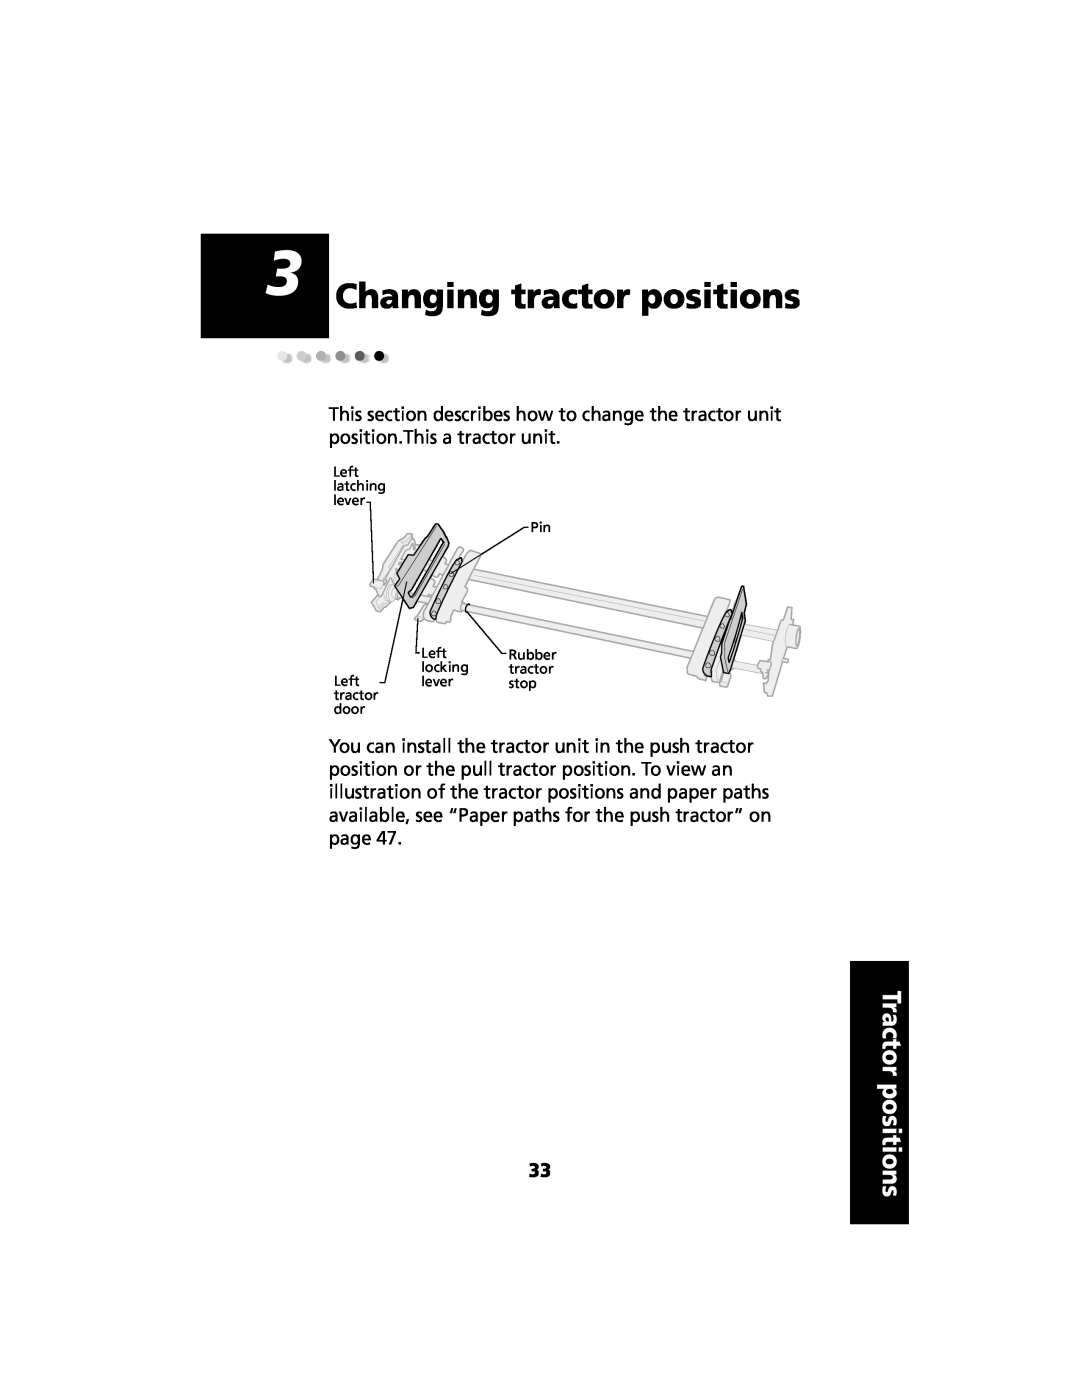 Lexmark 2480 manual Changing tractor positions, Tractor positions 